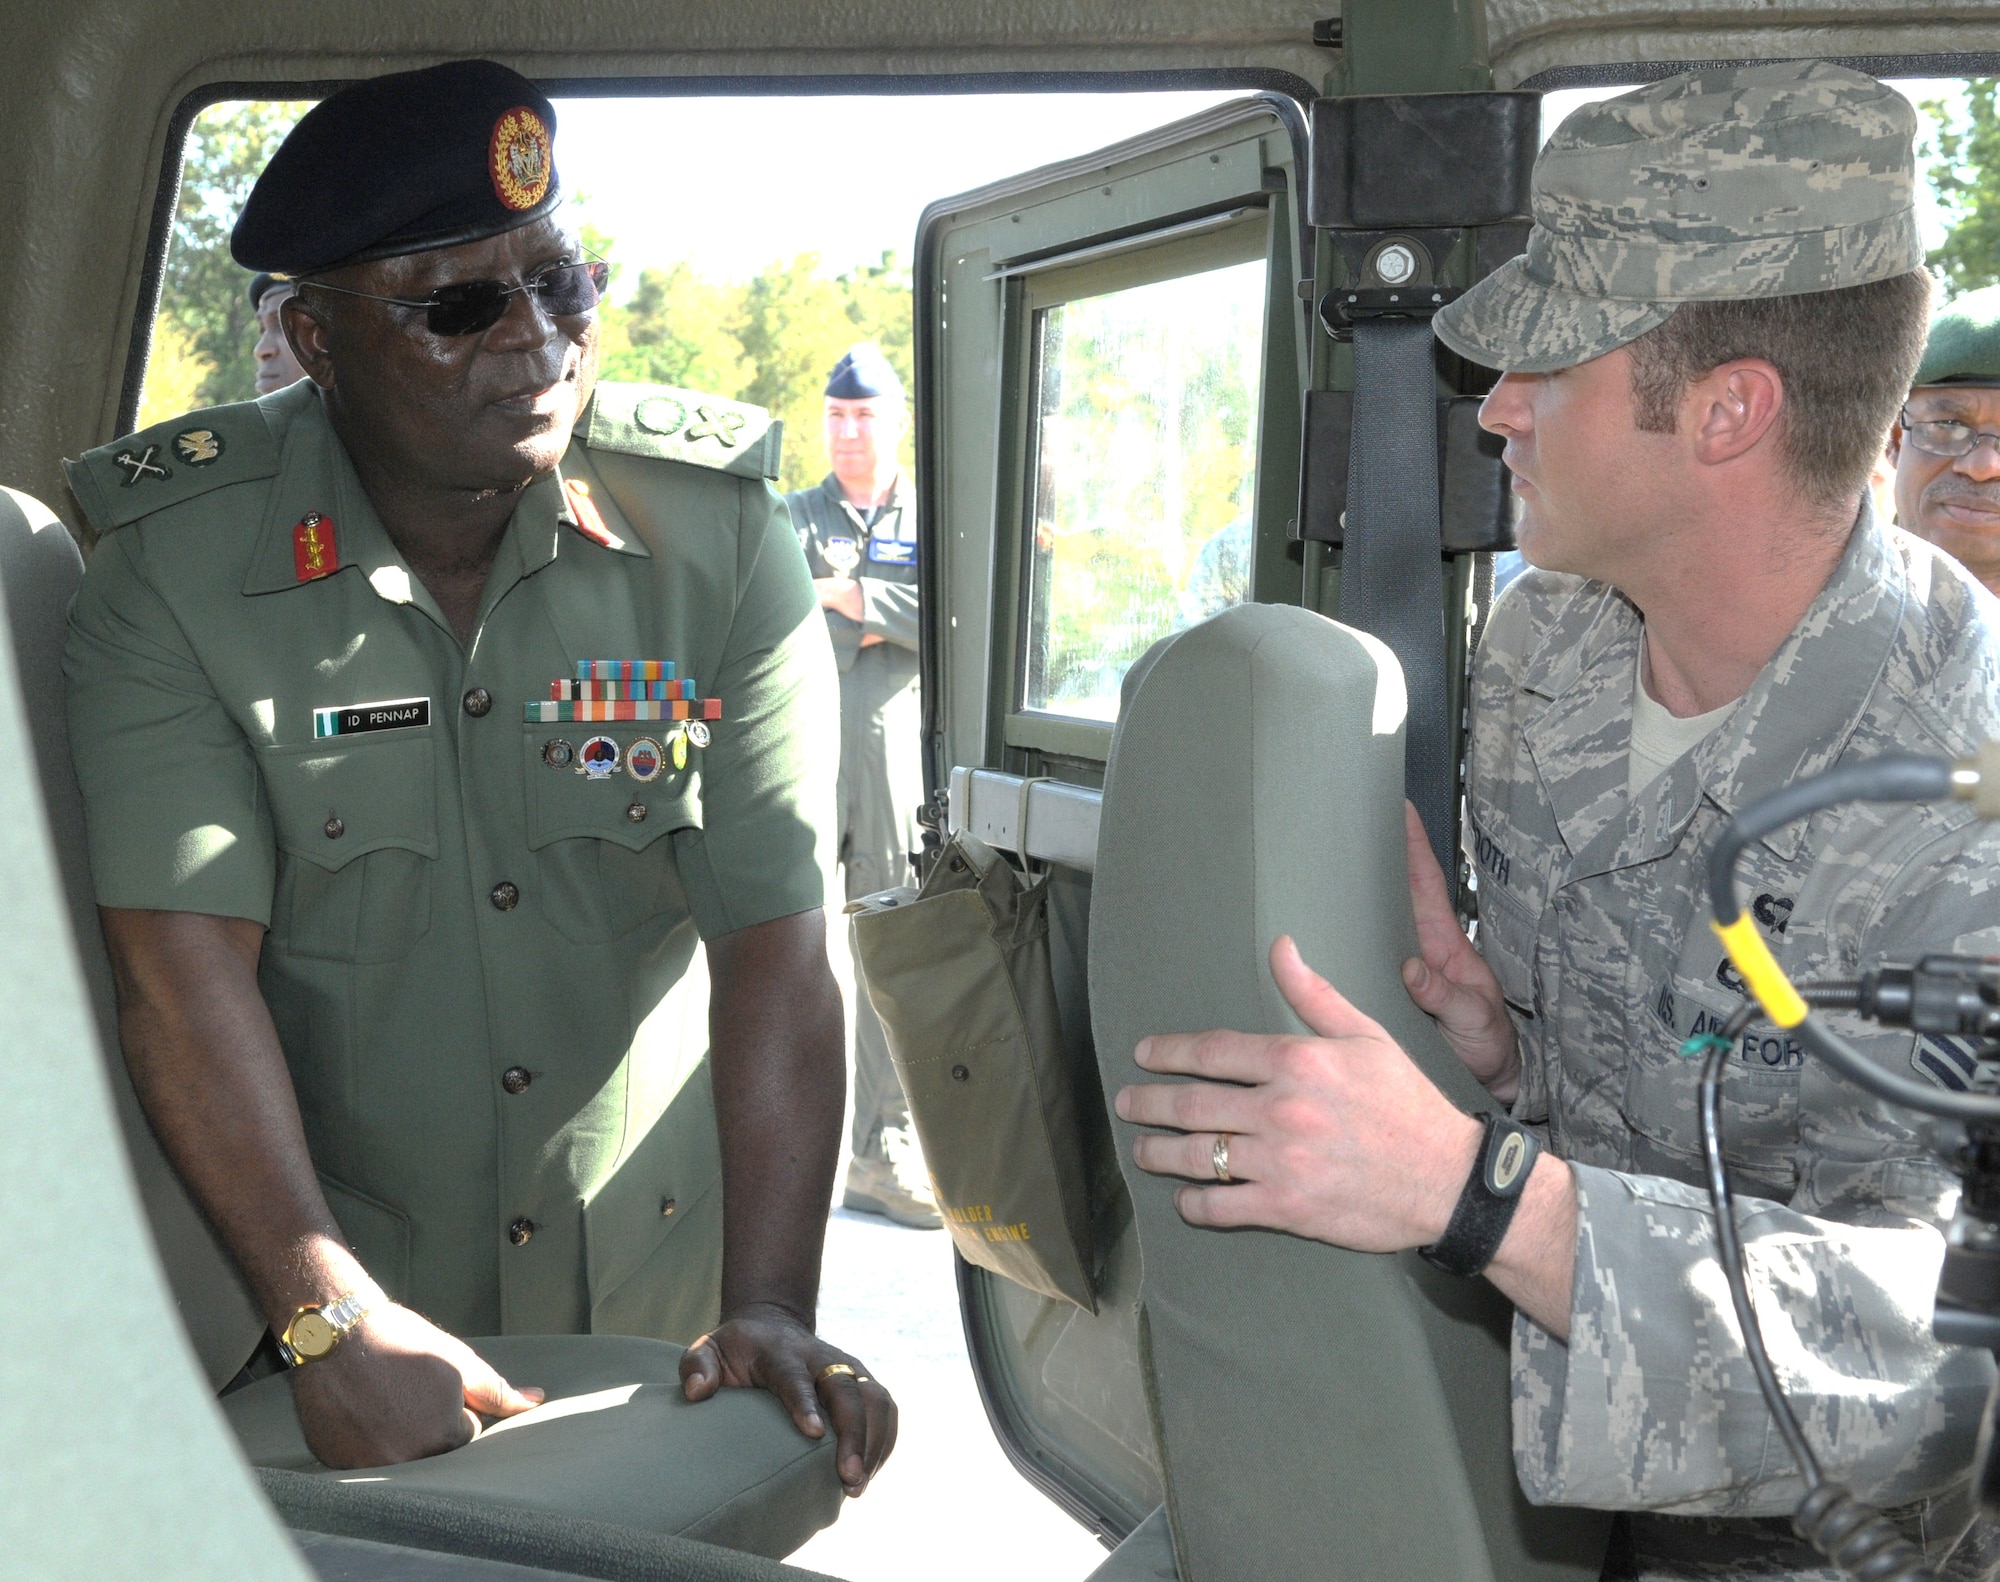 RAMSTEIN AIR BASE, Germany -- Nigerian Armed Forces Maj. Gen. Pennap receives an orientation on a rapidly deployable Hummer from ground radio operator Staff Sgt. Ronald Booth of the 435th Contingency Response Group Sept. 11 here. The General was part of a group of Nigerian military officials who visited Ramstein as part of a visit to U.S. Africa Command. They received a series of orientations to provide information and the basis for continued cooperation between U.S. and Nigerian forces. 
The group was hosted at Ramstein by 17th Air Force (Air Forces Africa). As the air component for U.S. Africa Command, 17 AF has been partnering with Nigeria, and conducted three engagements with the nation in August. (USAF photo by Master Sgt. Jim Fisher) 
